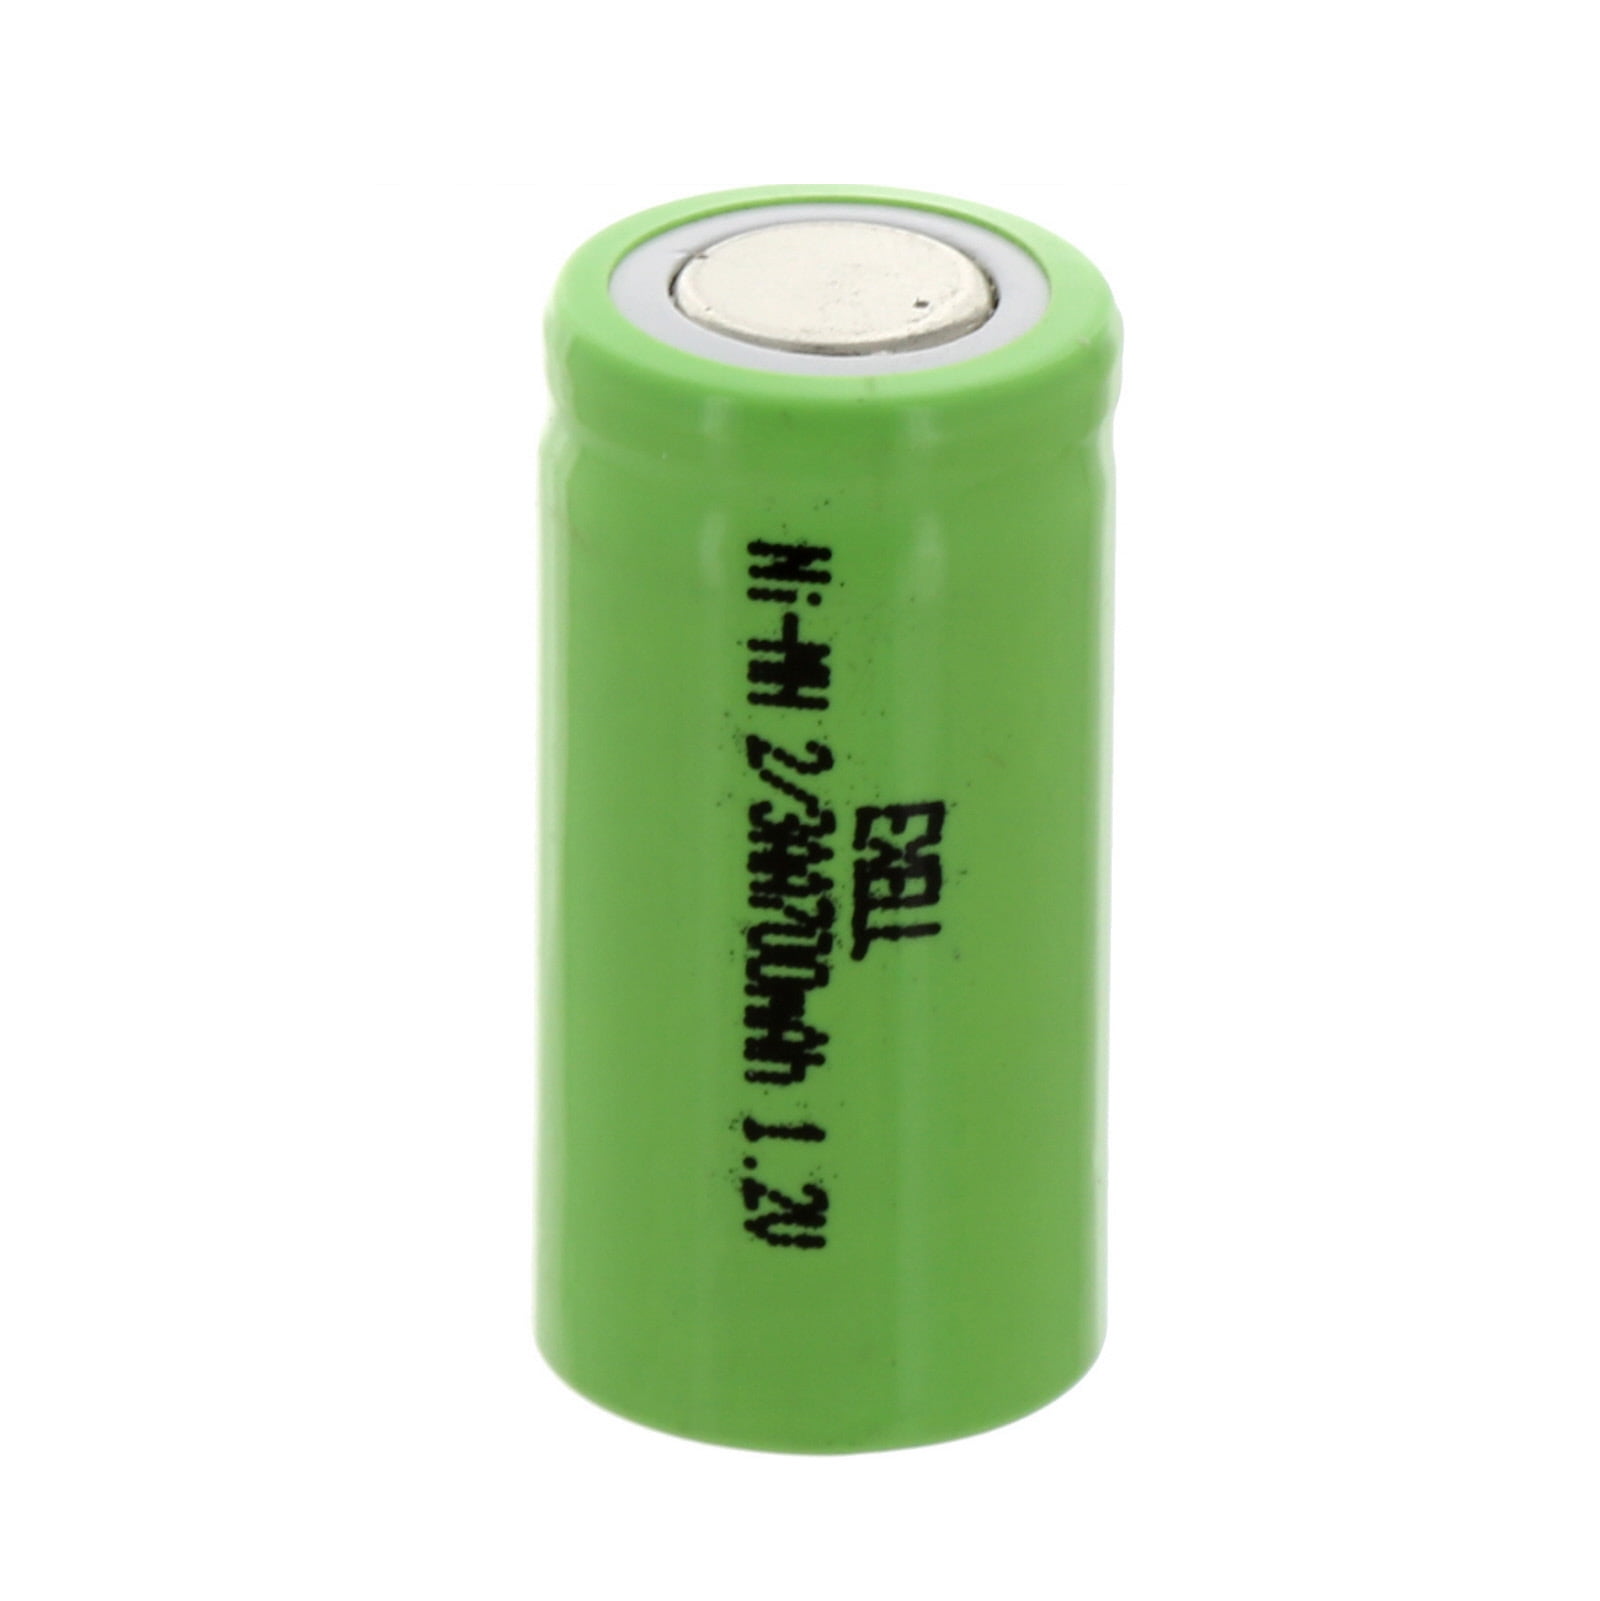 2 X 16340 2500mAh 3.7V CR123A 123A Li-ion Rechargeable Battery For Flashlight T5 